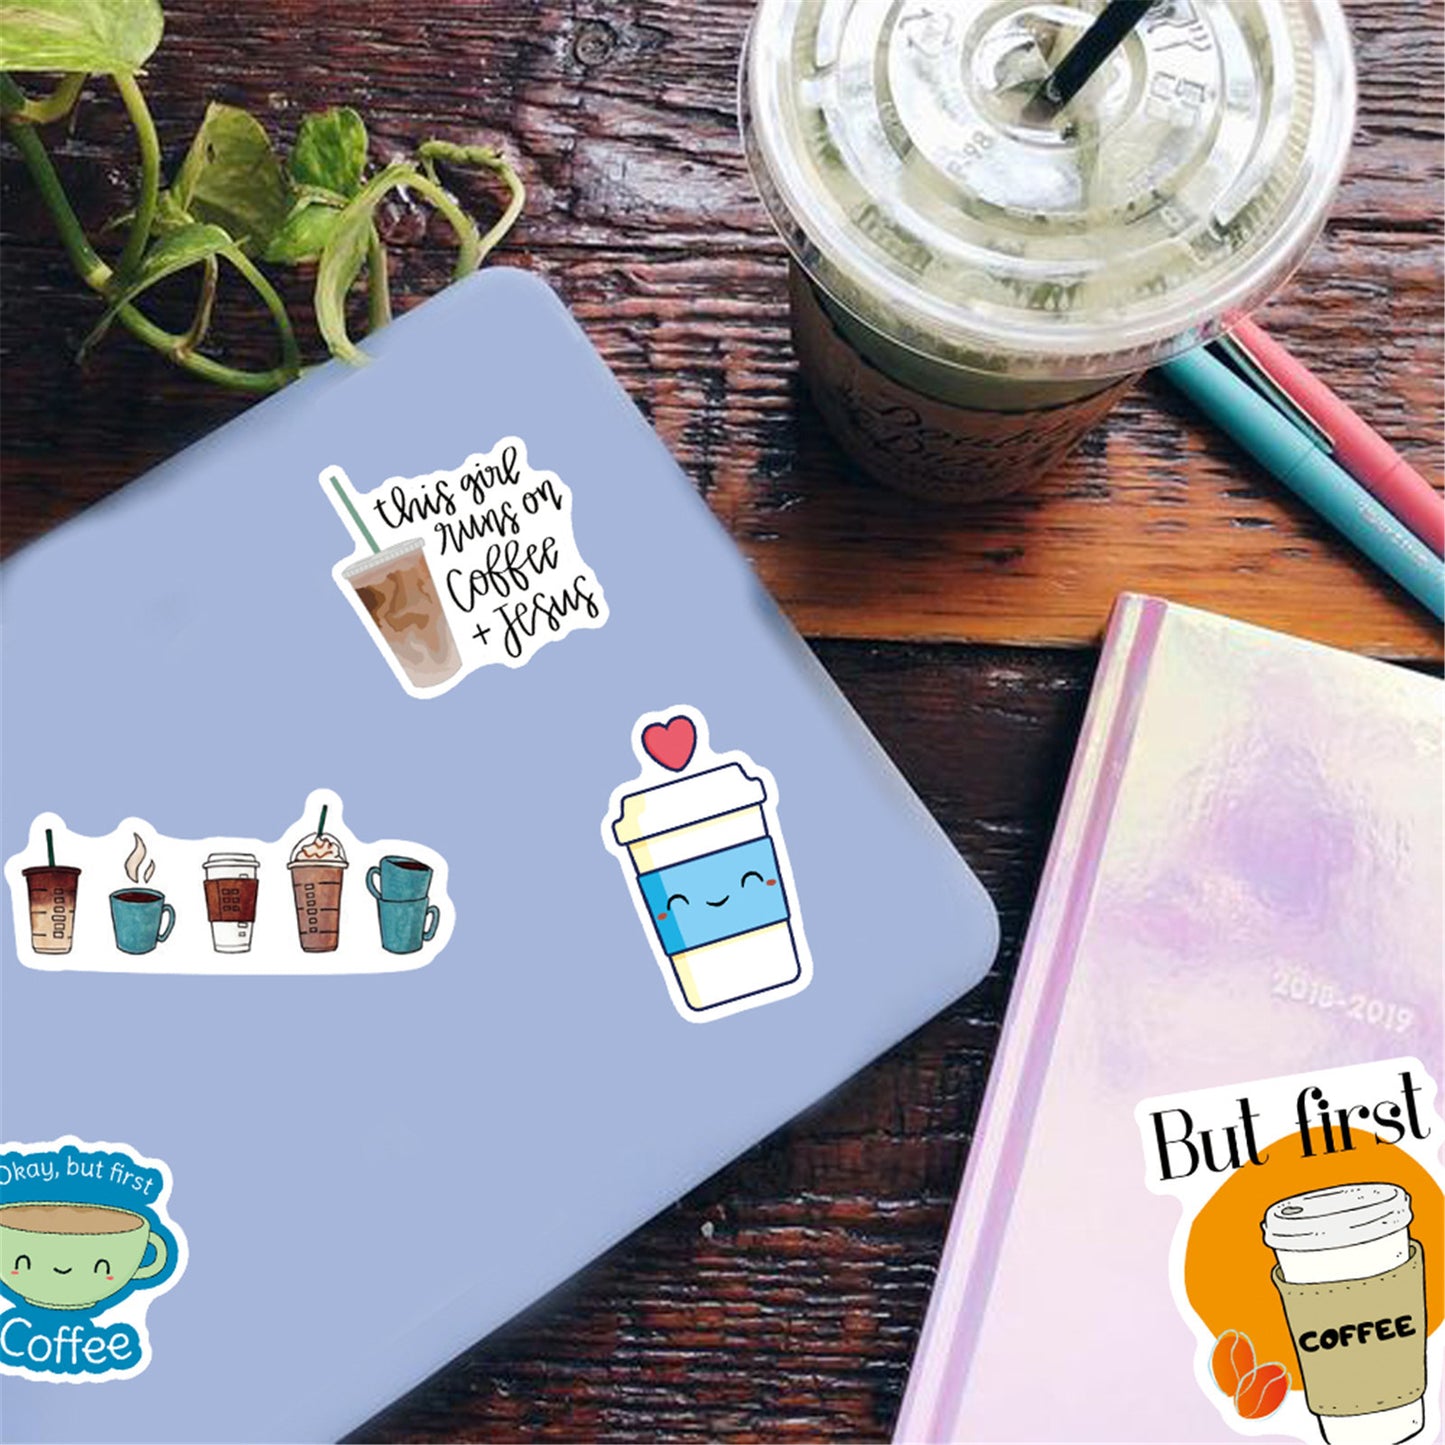 New Cartoon Coffee Doodle Stickers (50 stickers)